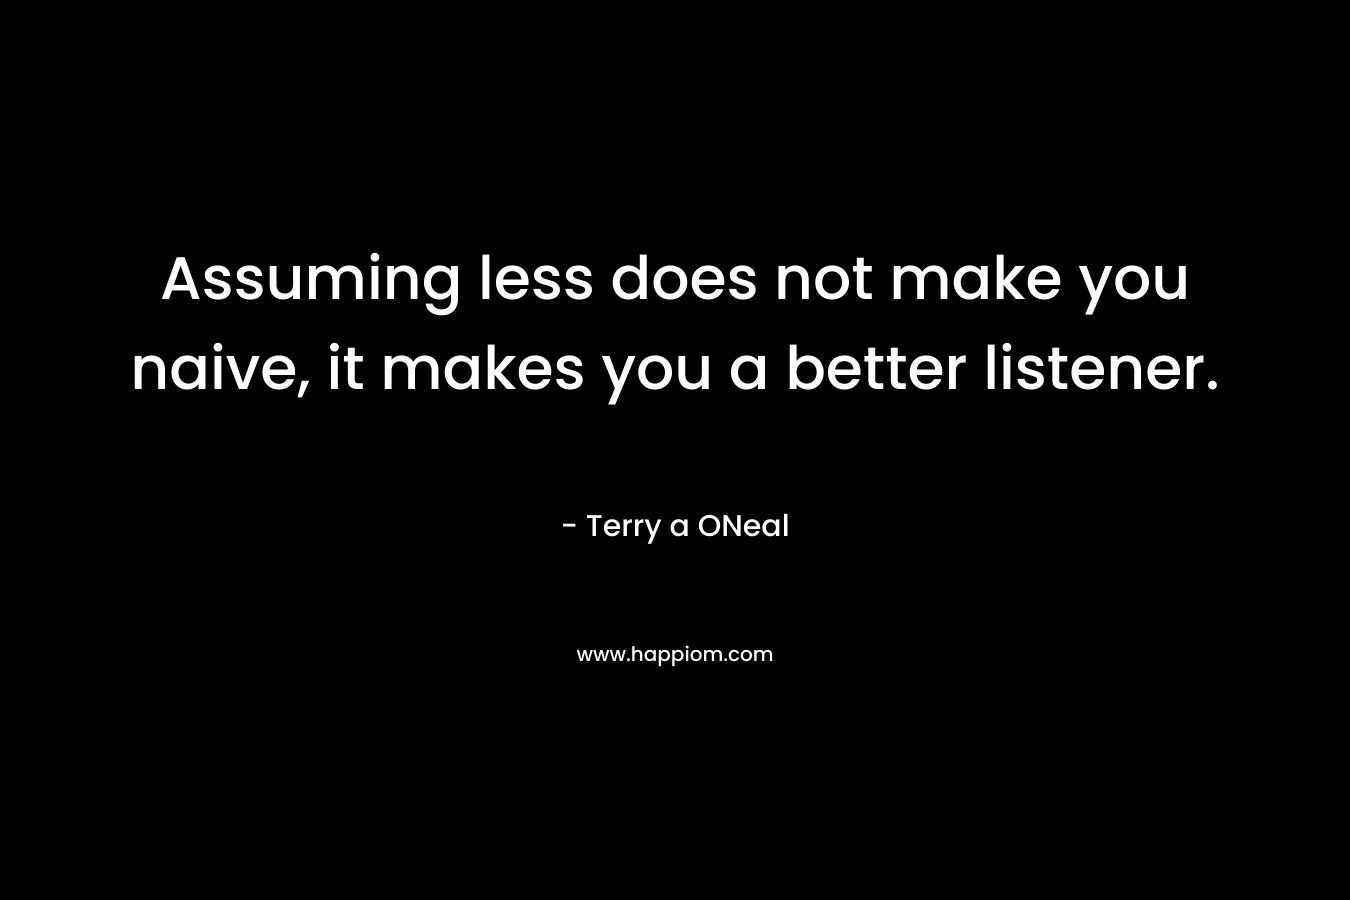 Assuming less does not make you naive, it makes you a better listener. – Terry a ONeal